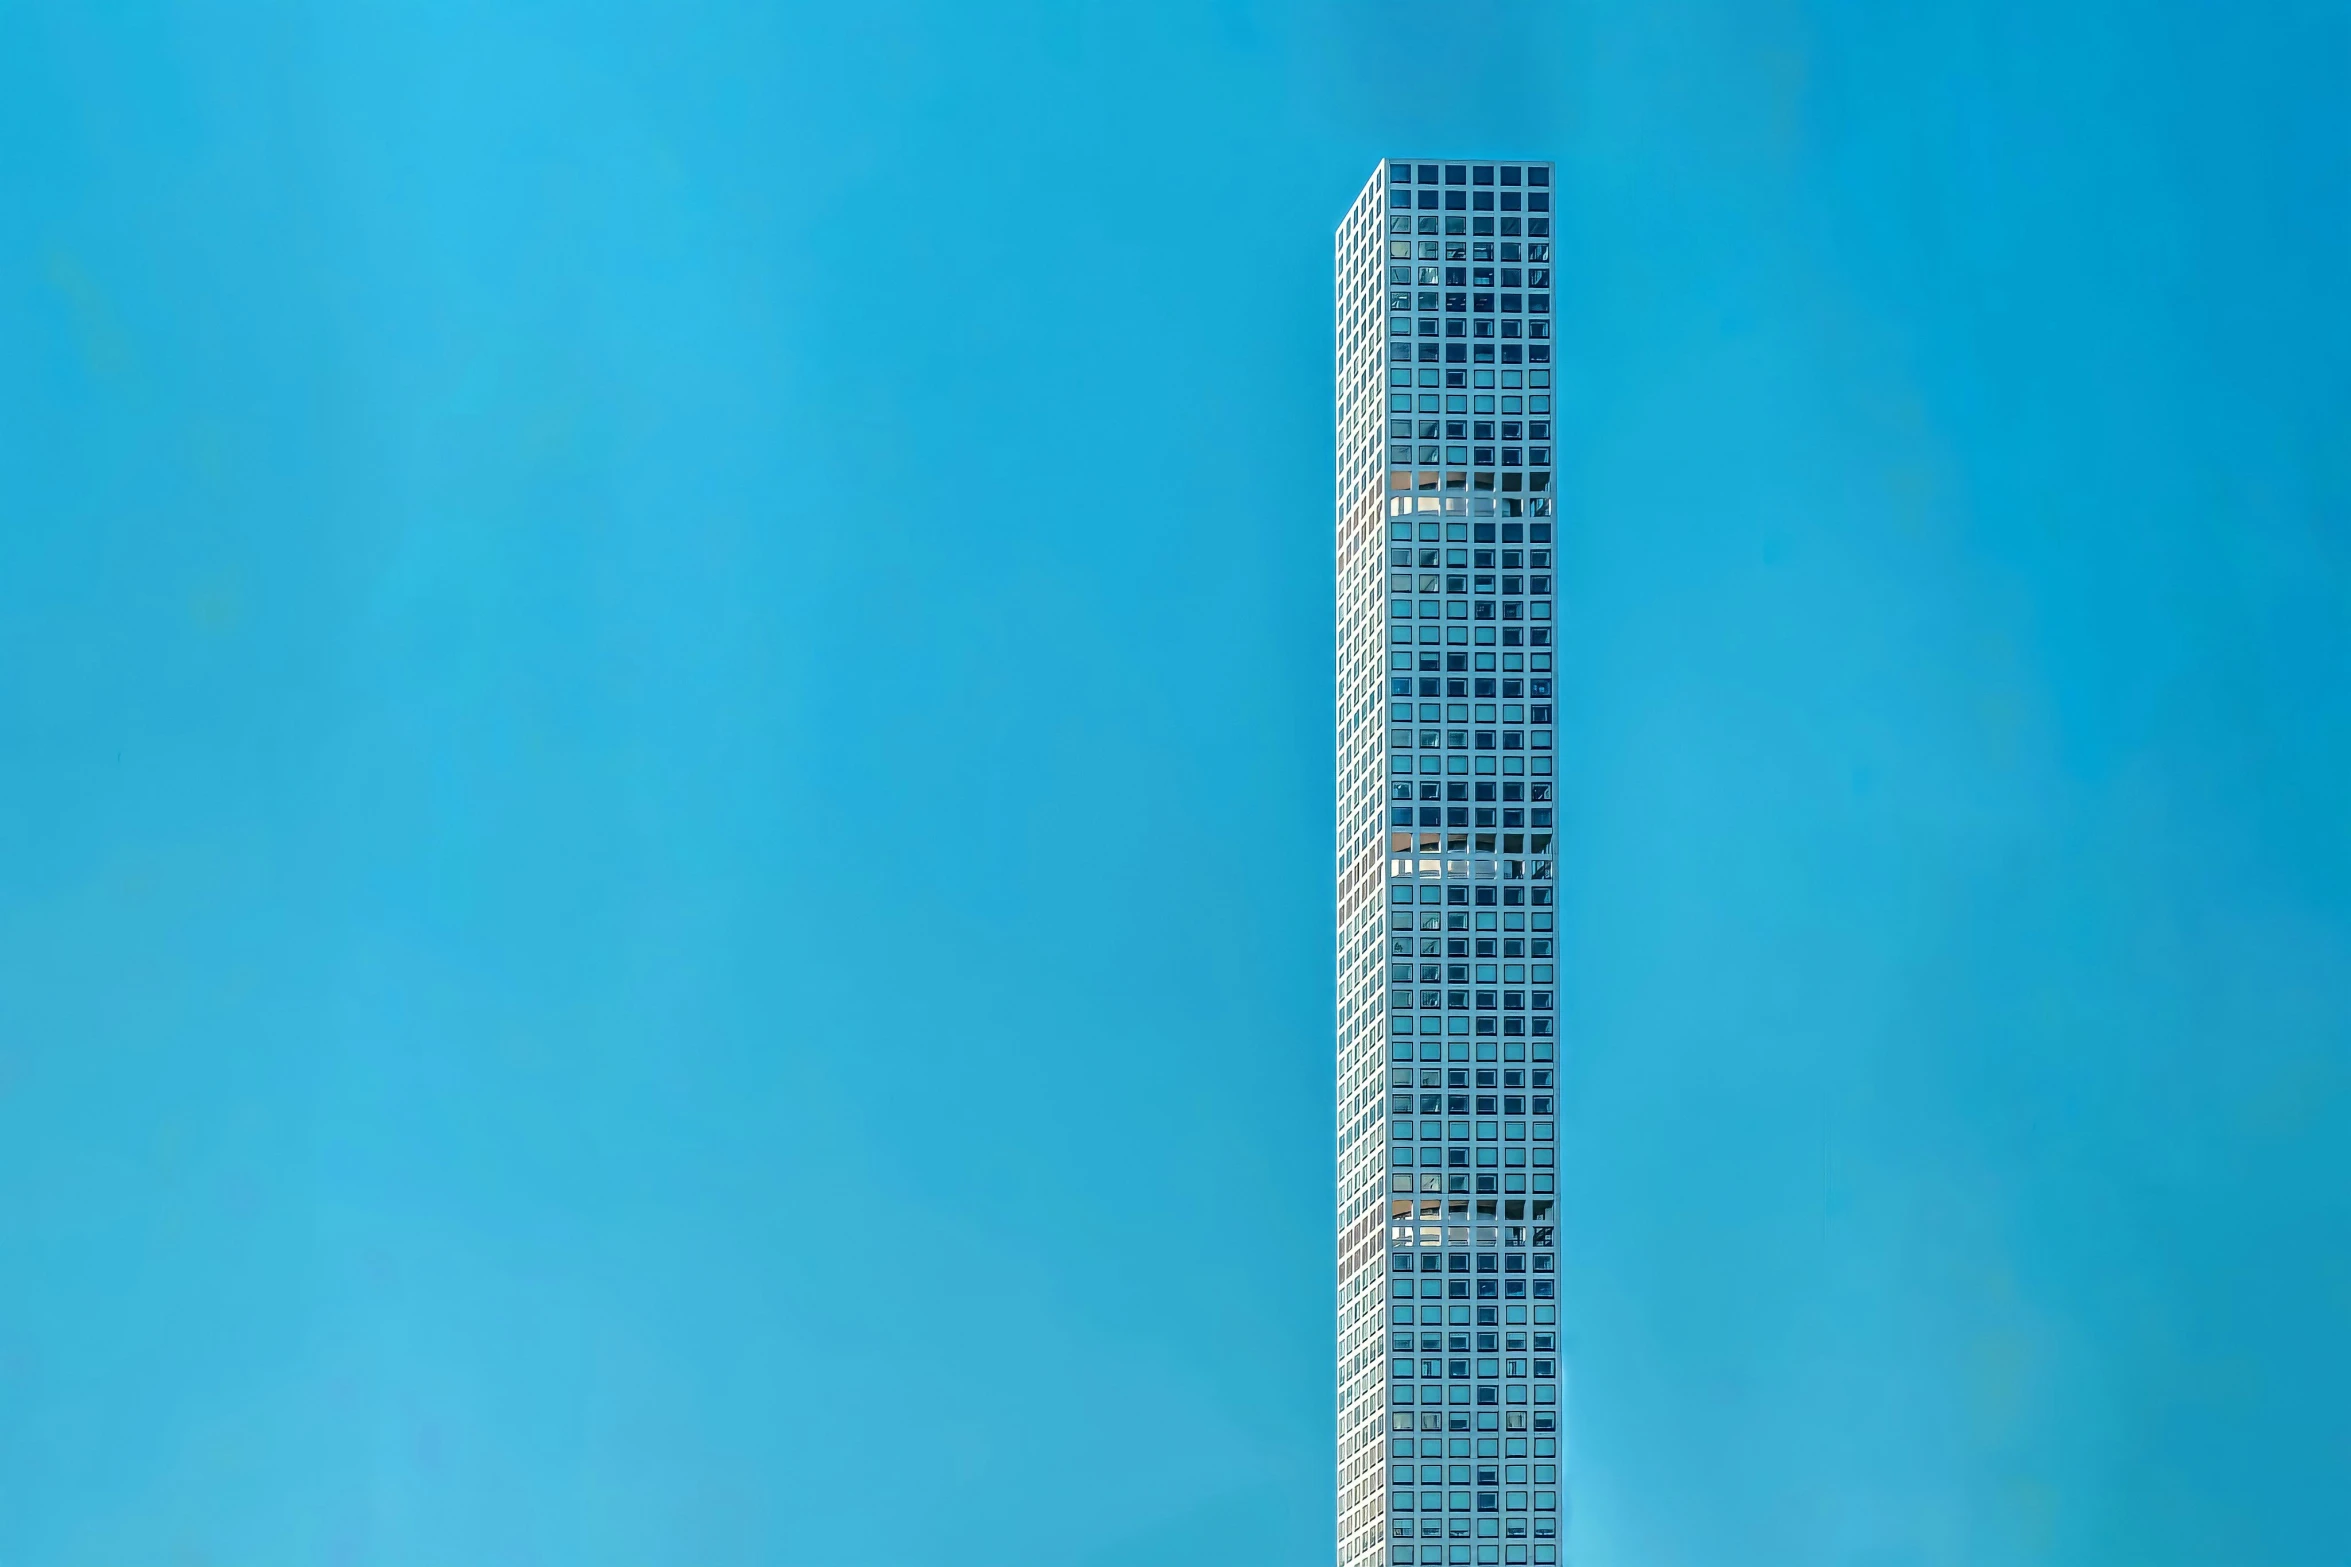 the very tall building has multiple levels on it